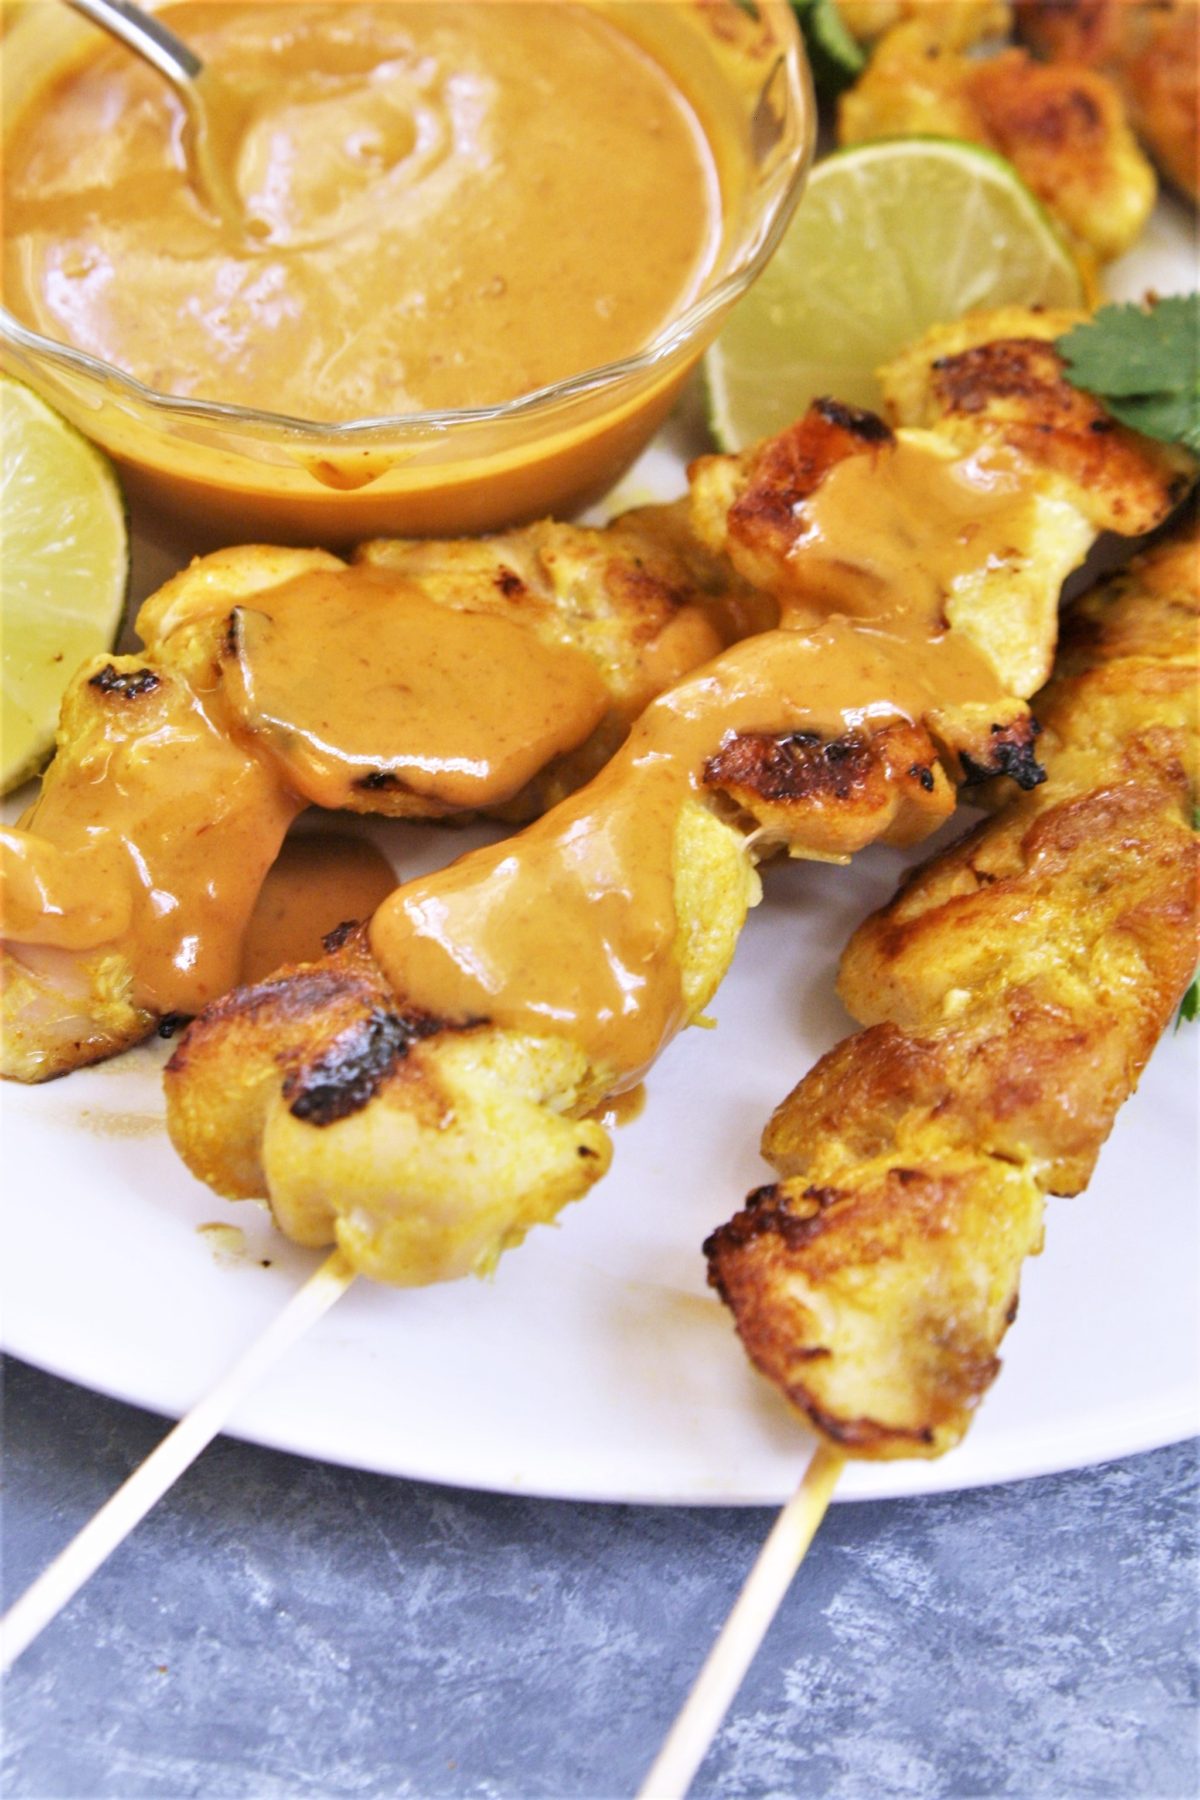 These tender and juicy chicken satay skewers are grilled and served with a creamy Vietnamese peanut sauce for dipping, making it a quick and delicious meal that the whole family will love!